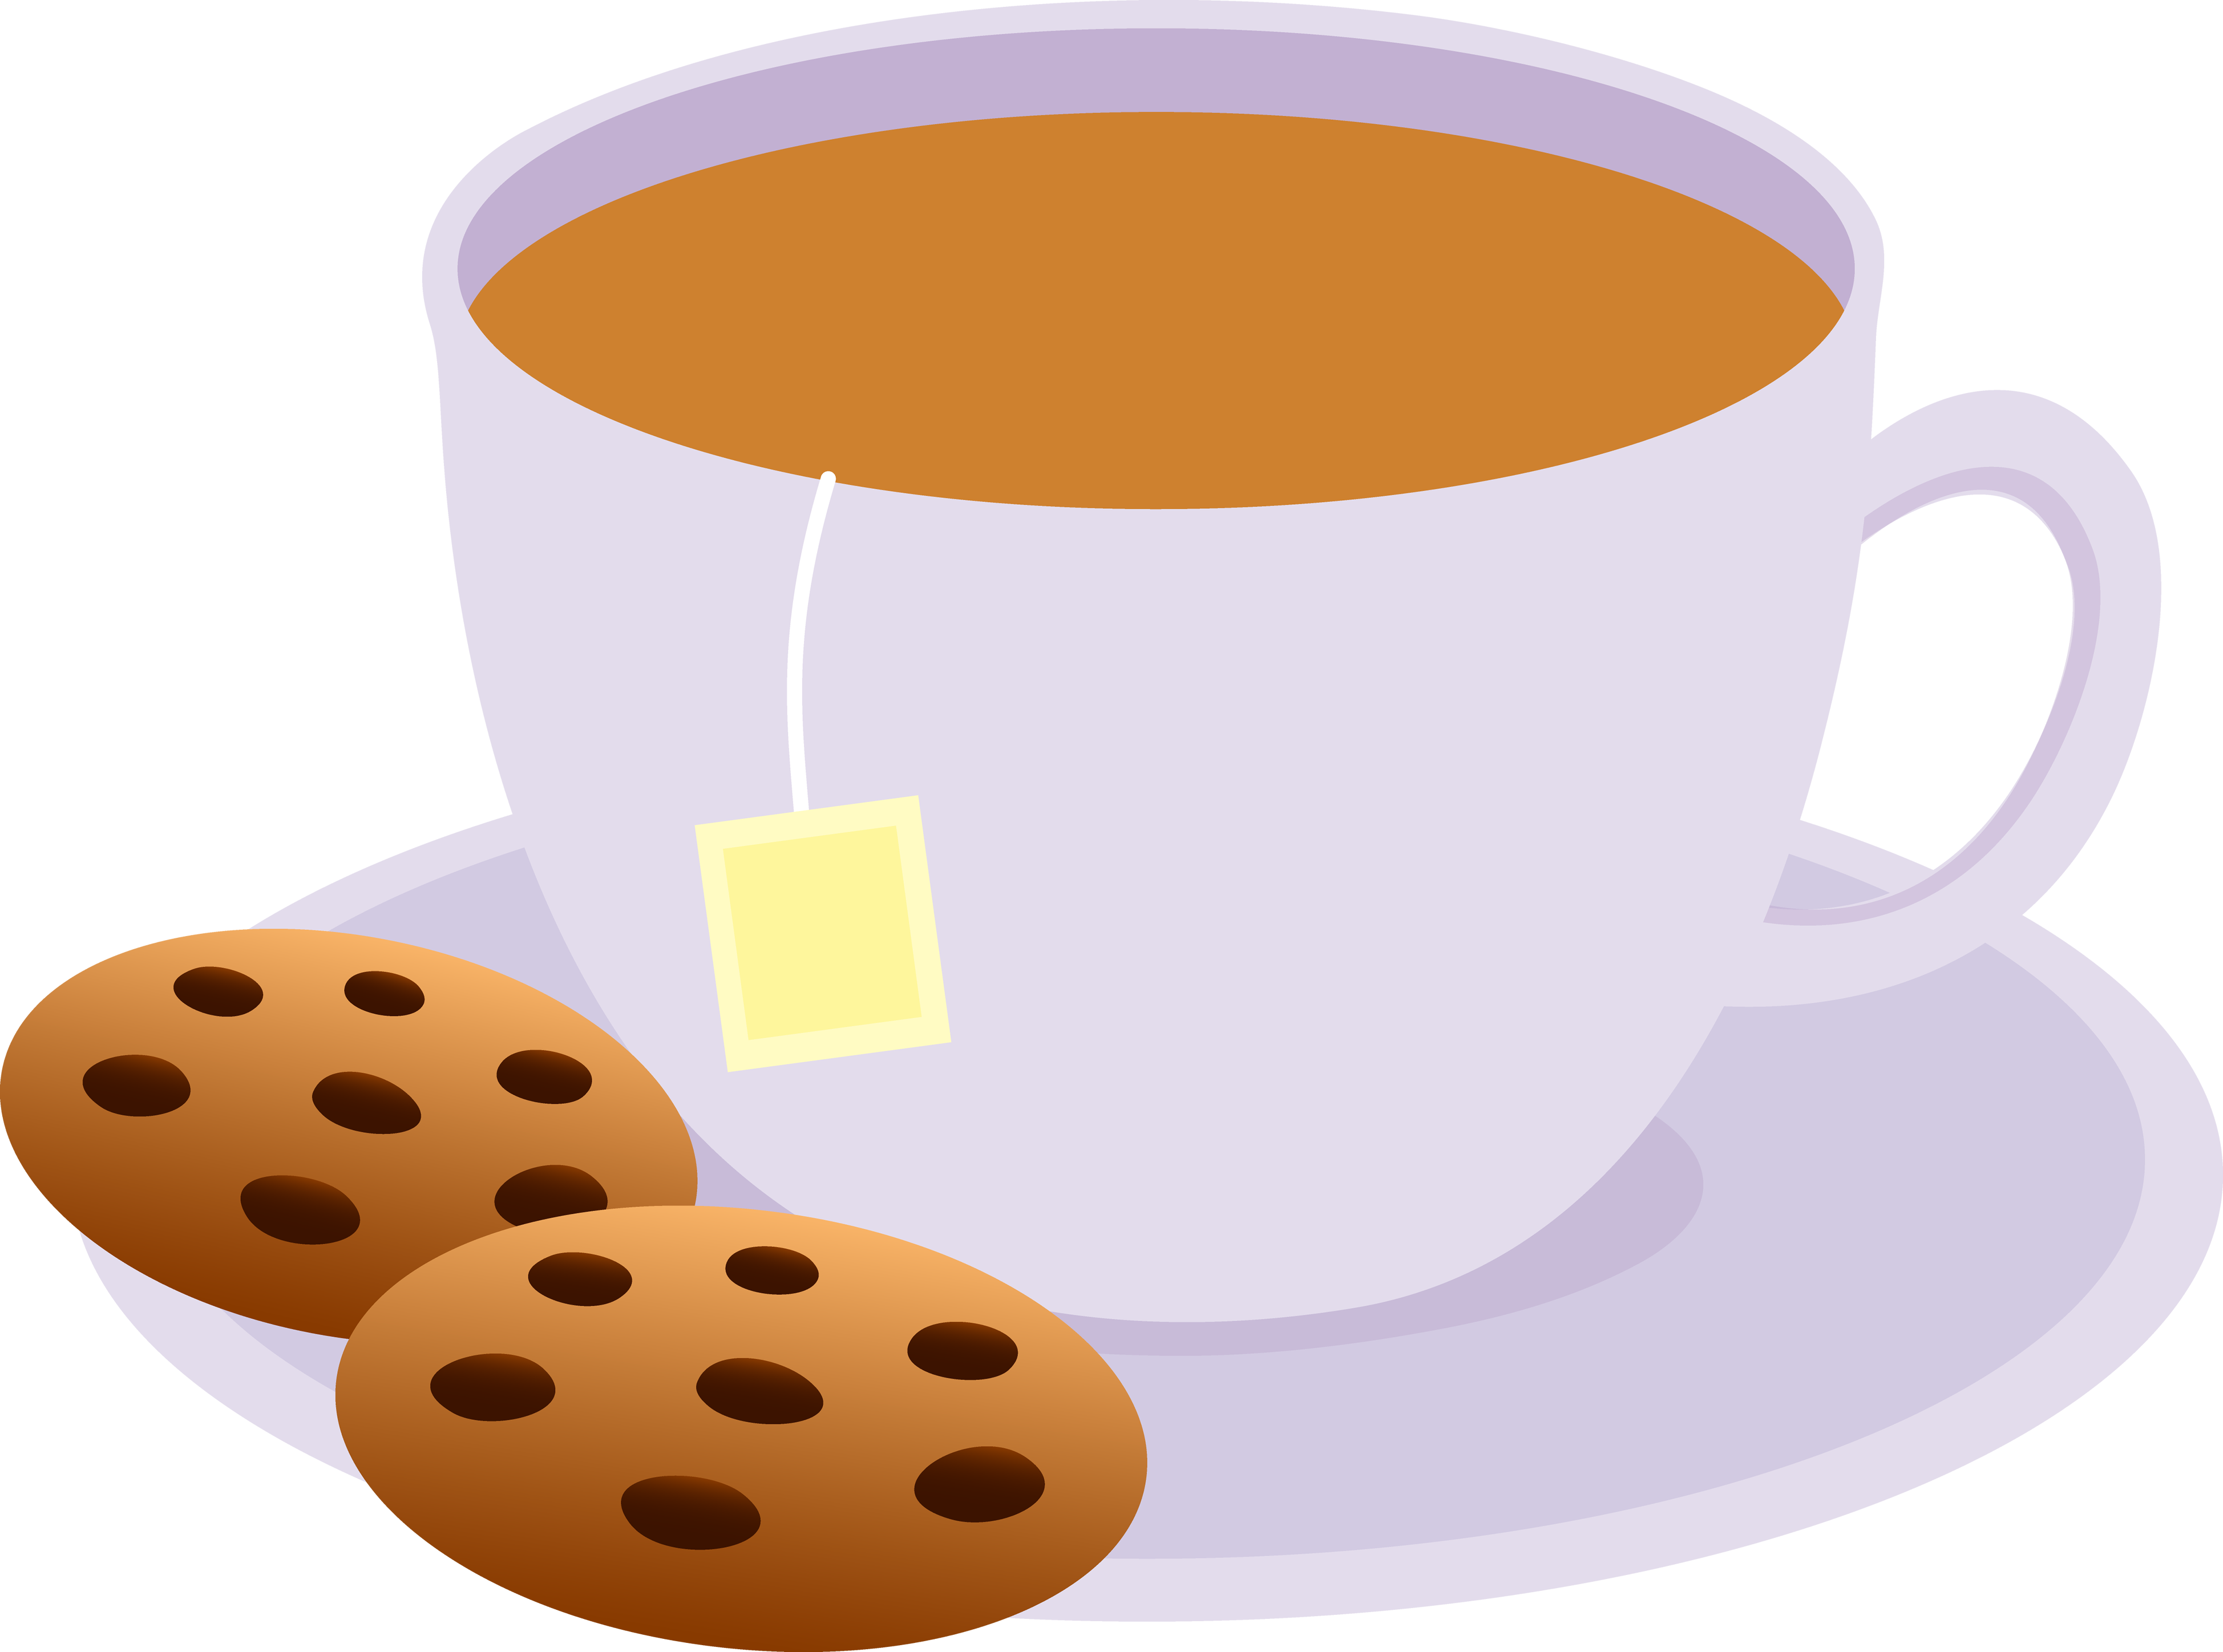 Teacup clipart with no background